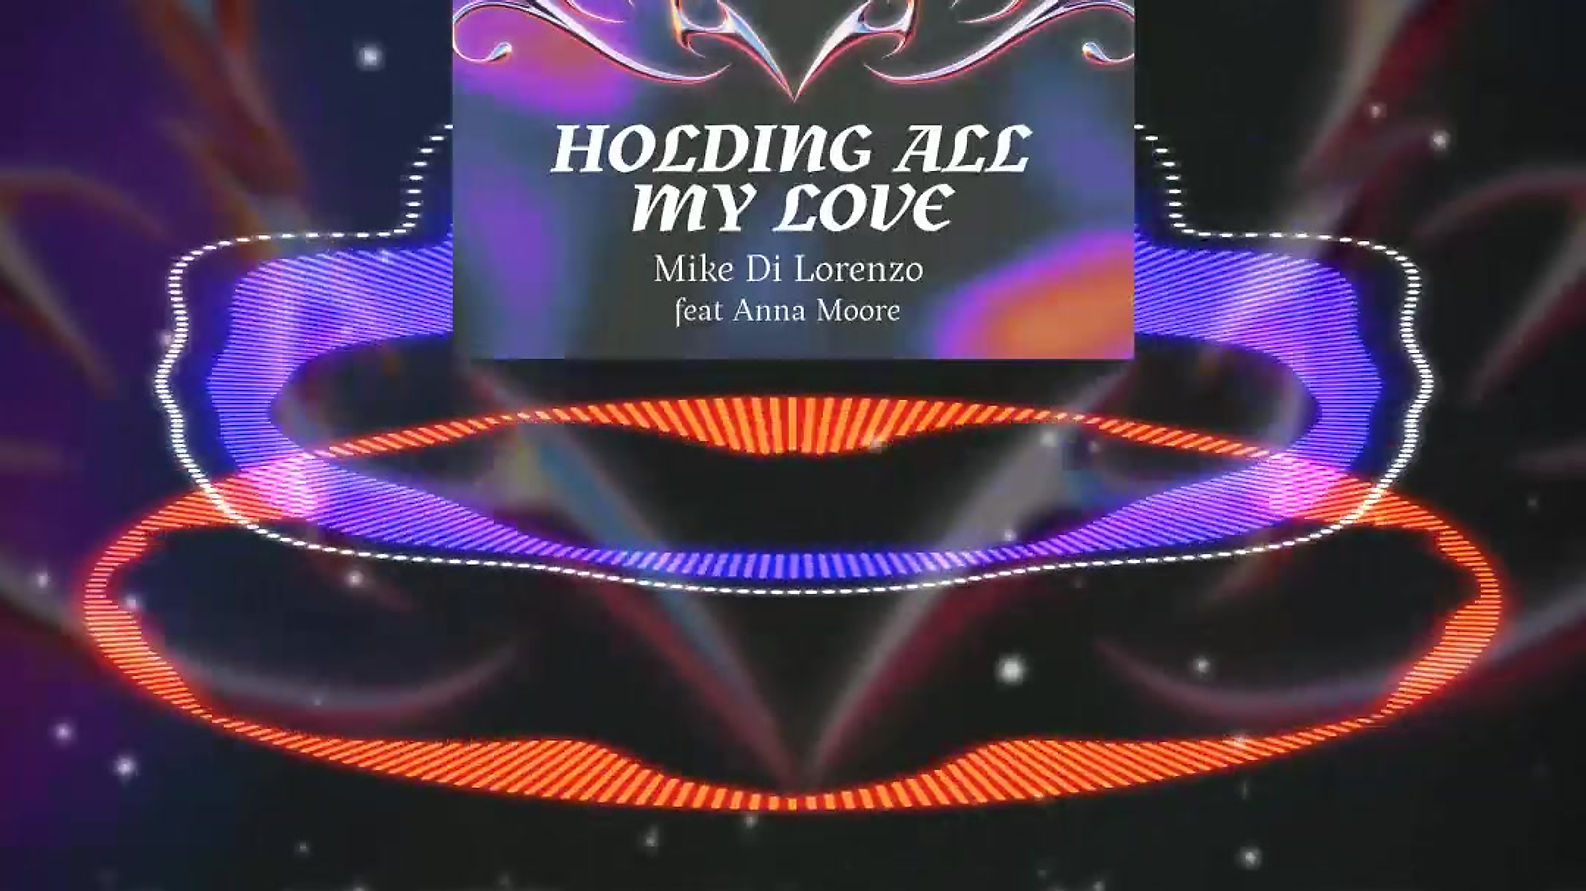 Holding All My Love (Mike Di Lorenzo feat Anna Moore) (1)